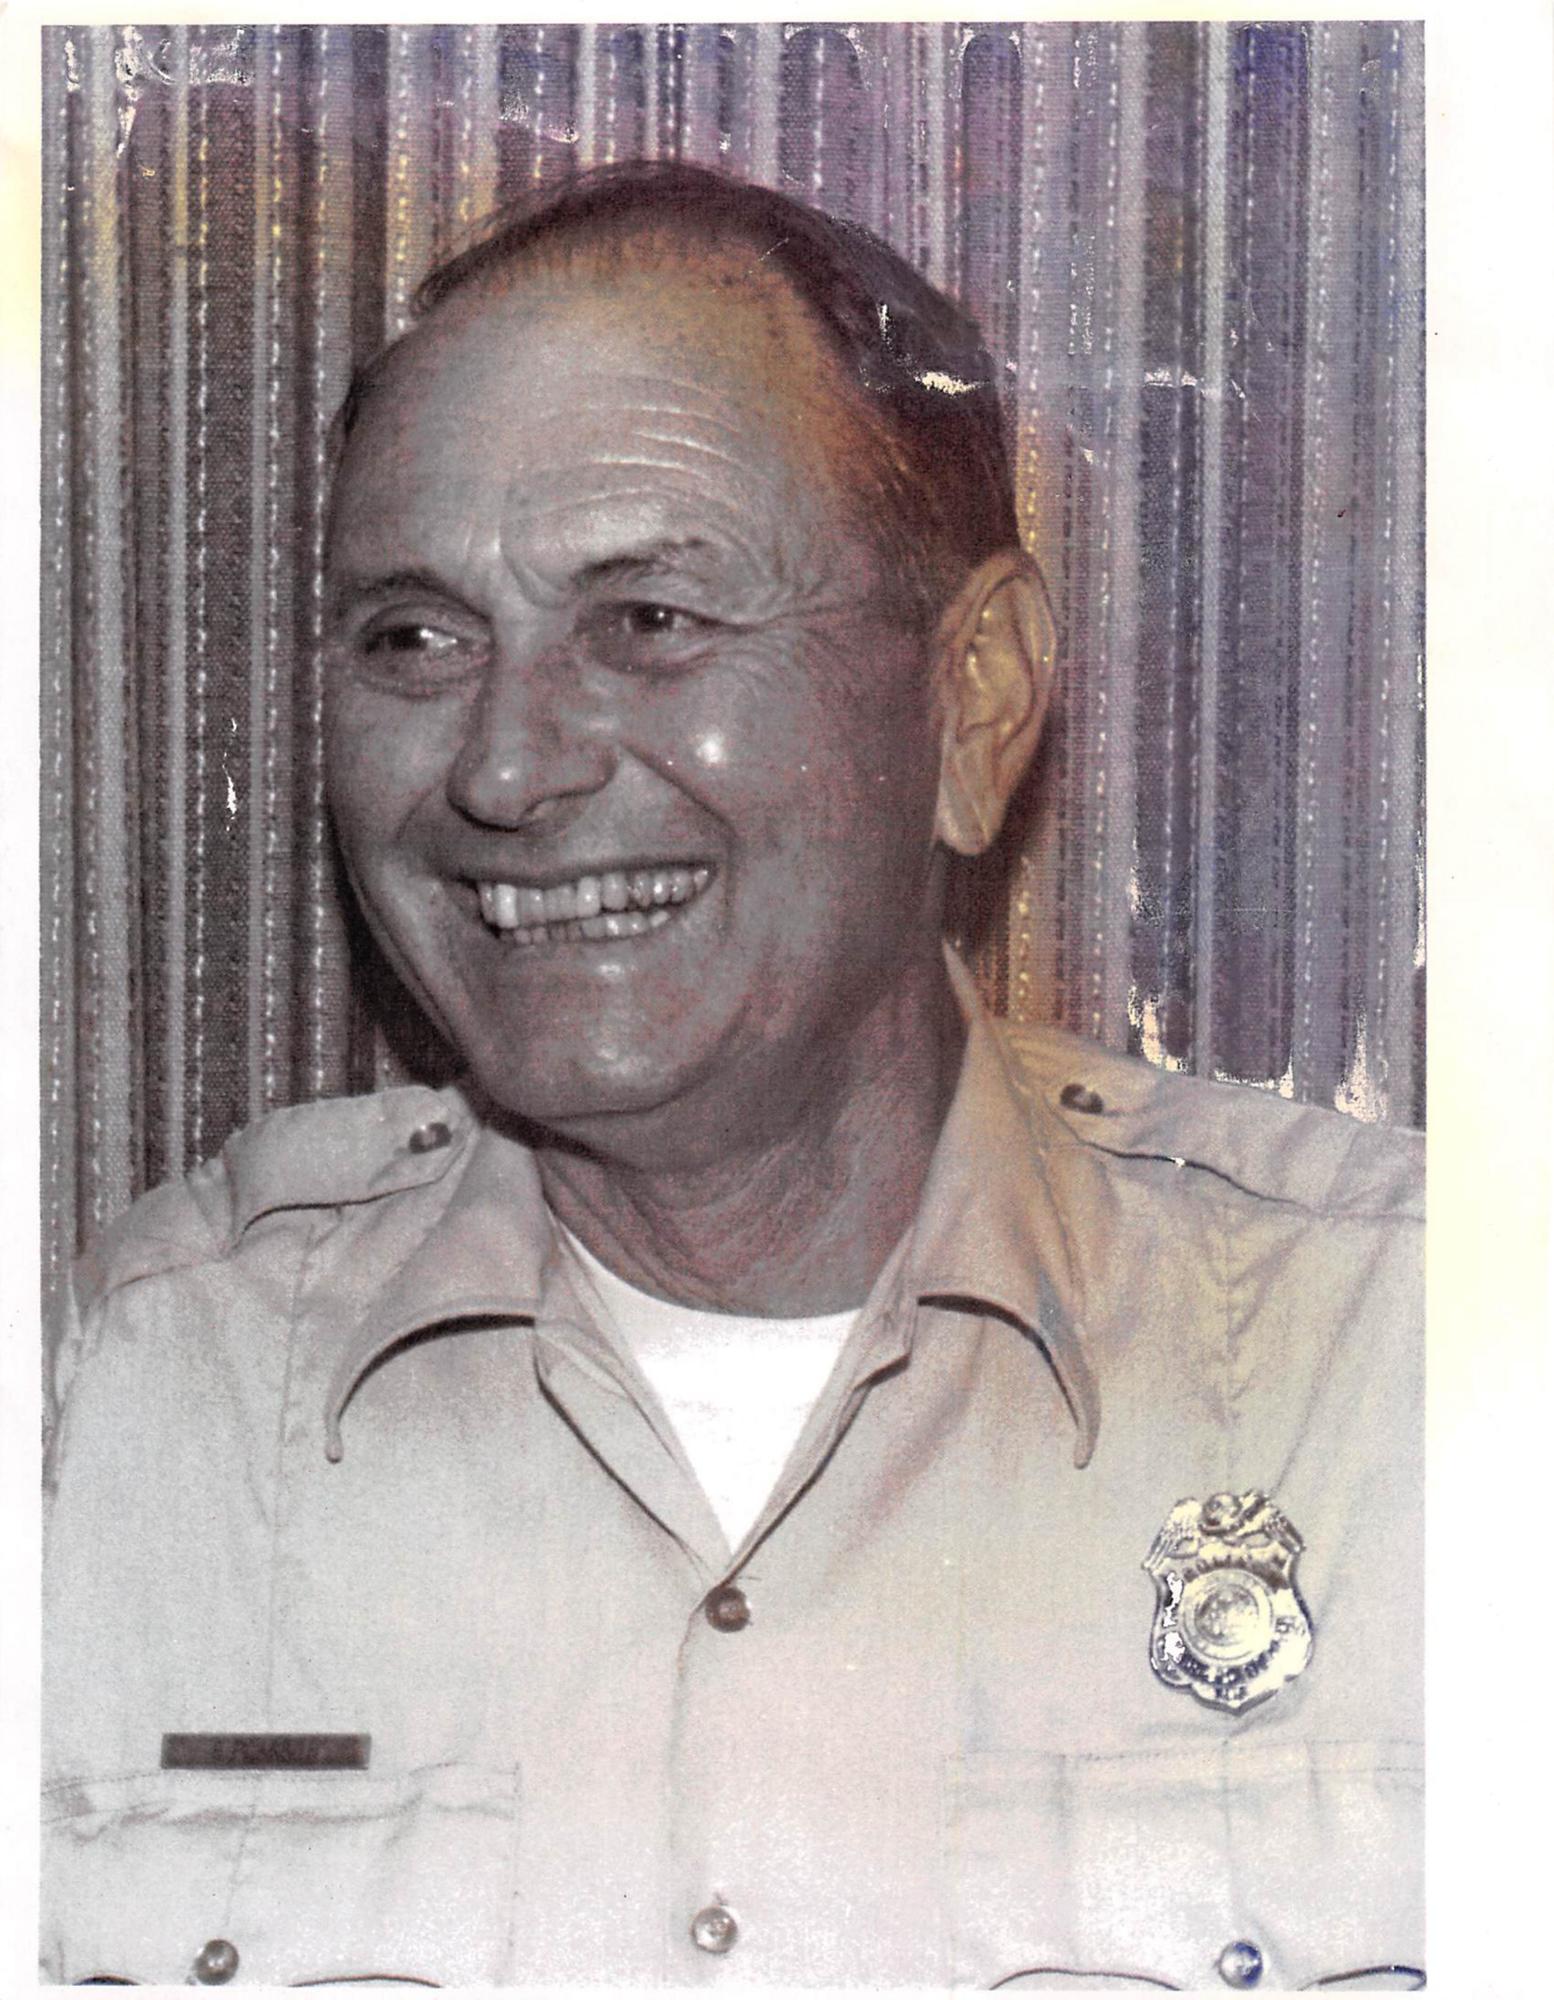 Royden Pearson worked at the Ormond Beach Police Department for 25 years. Courtesy photo